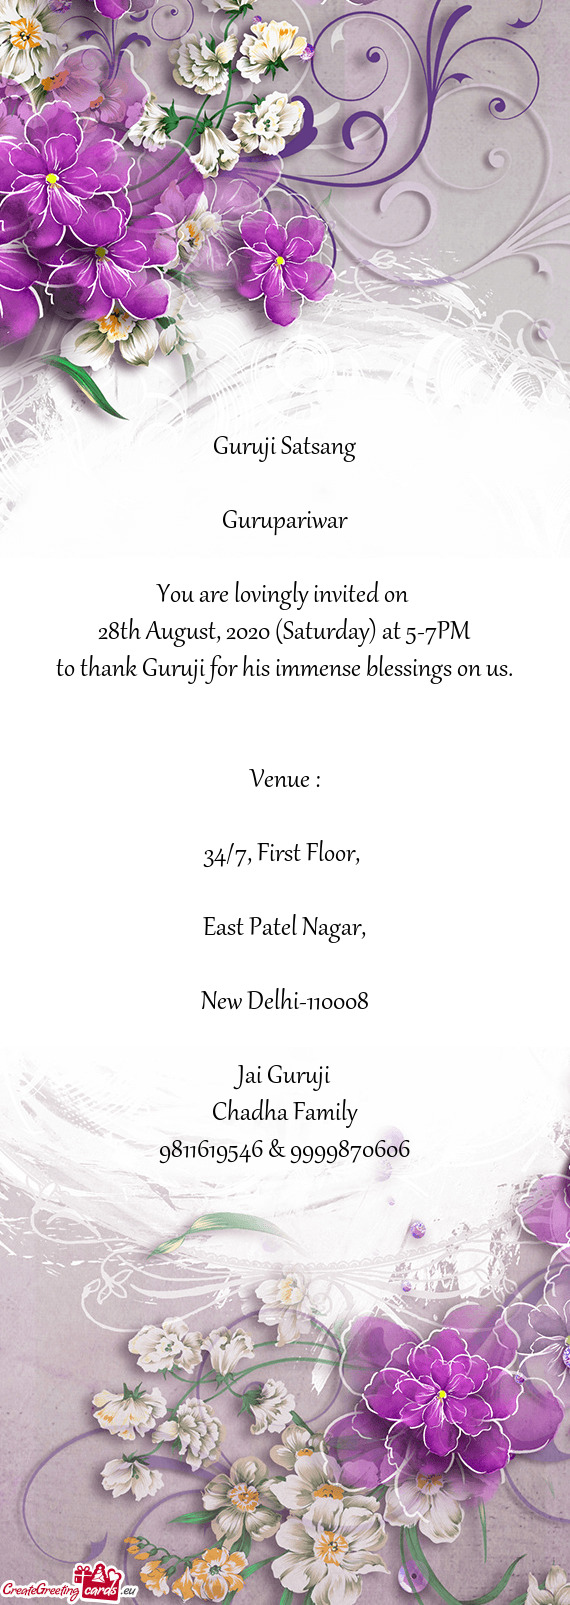 28th August, 2020 (Saturday) at 5-7PM